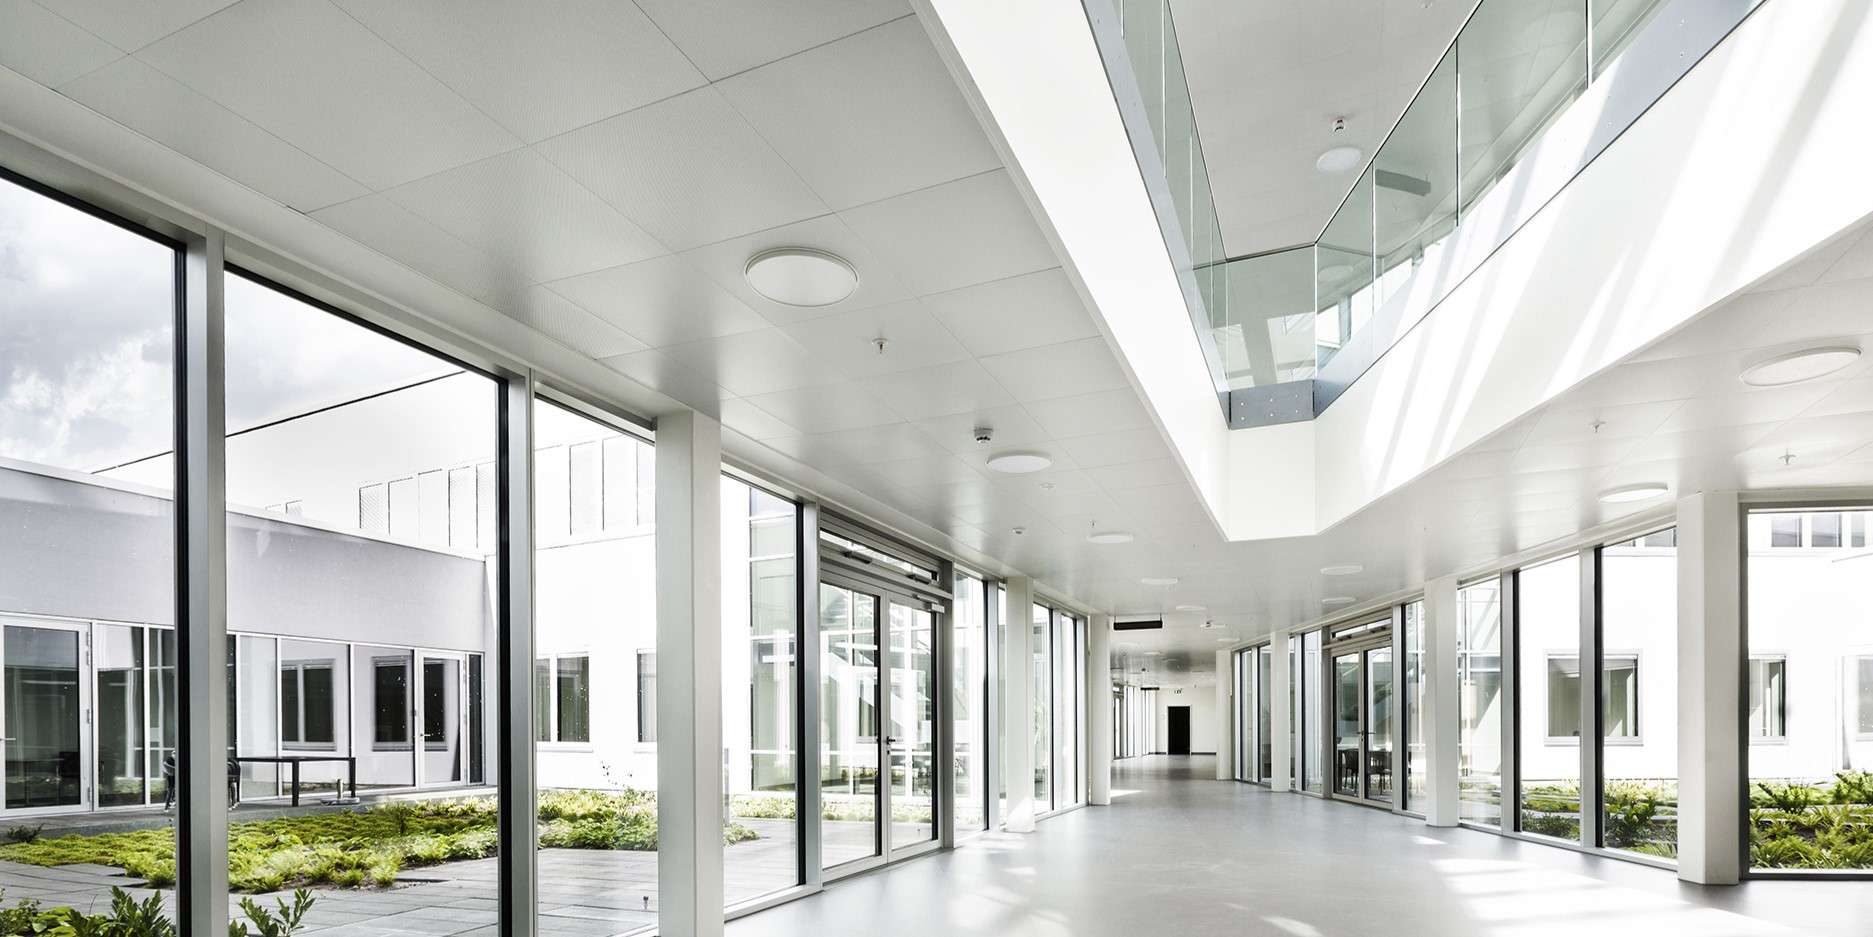 DAMPA Clip-In Tile installed in Aabenraa Hospital